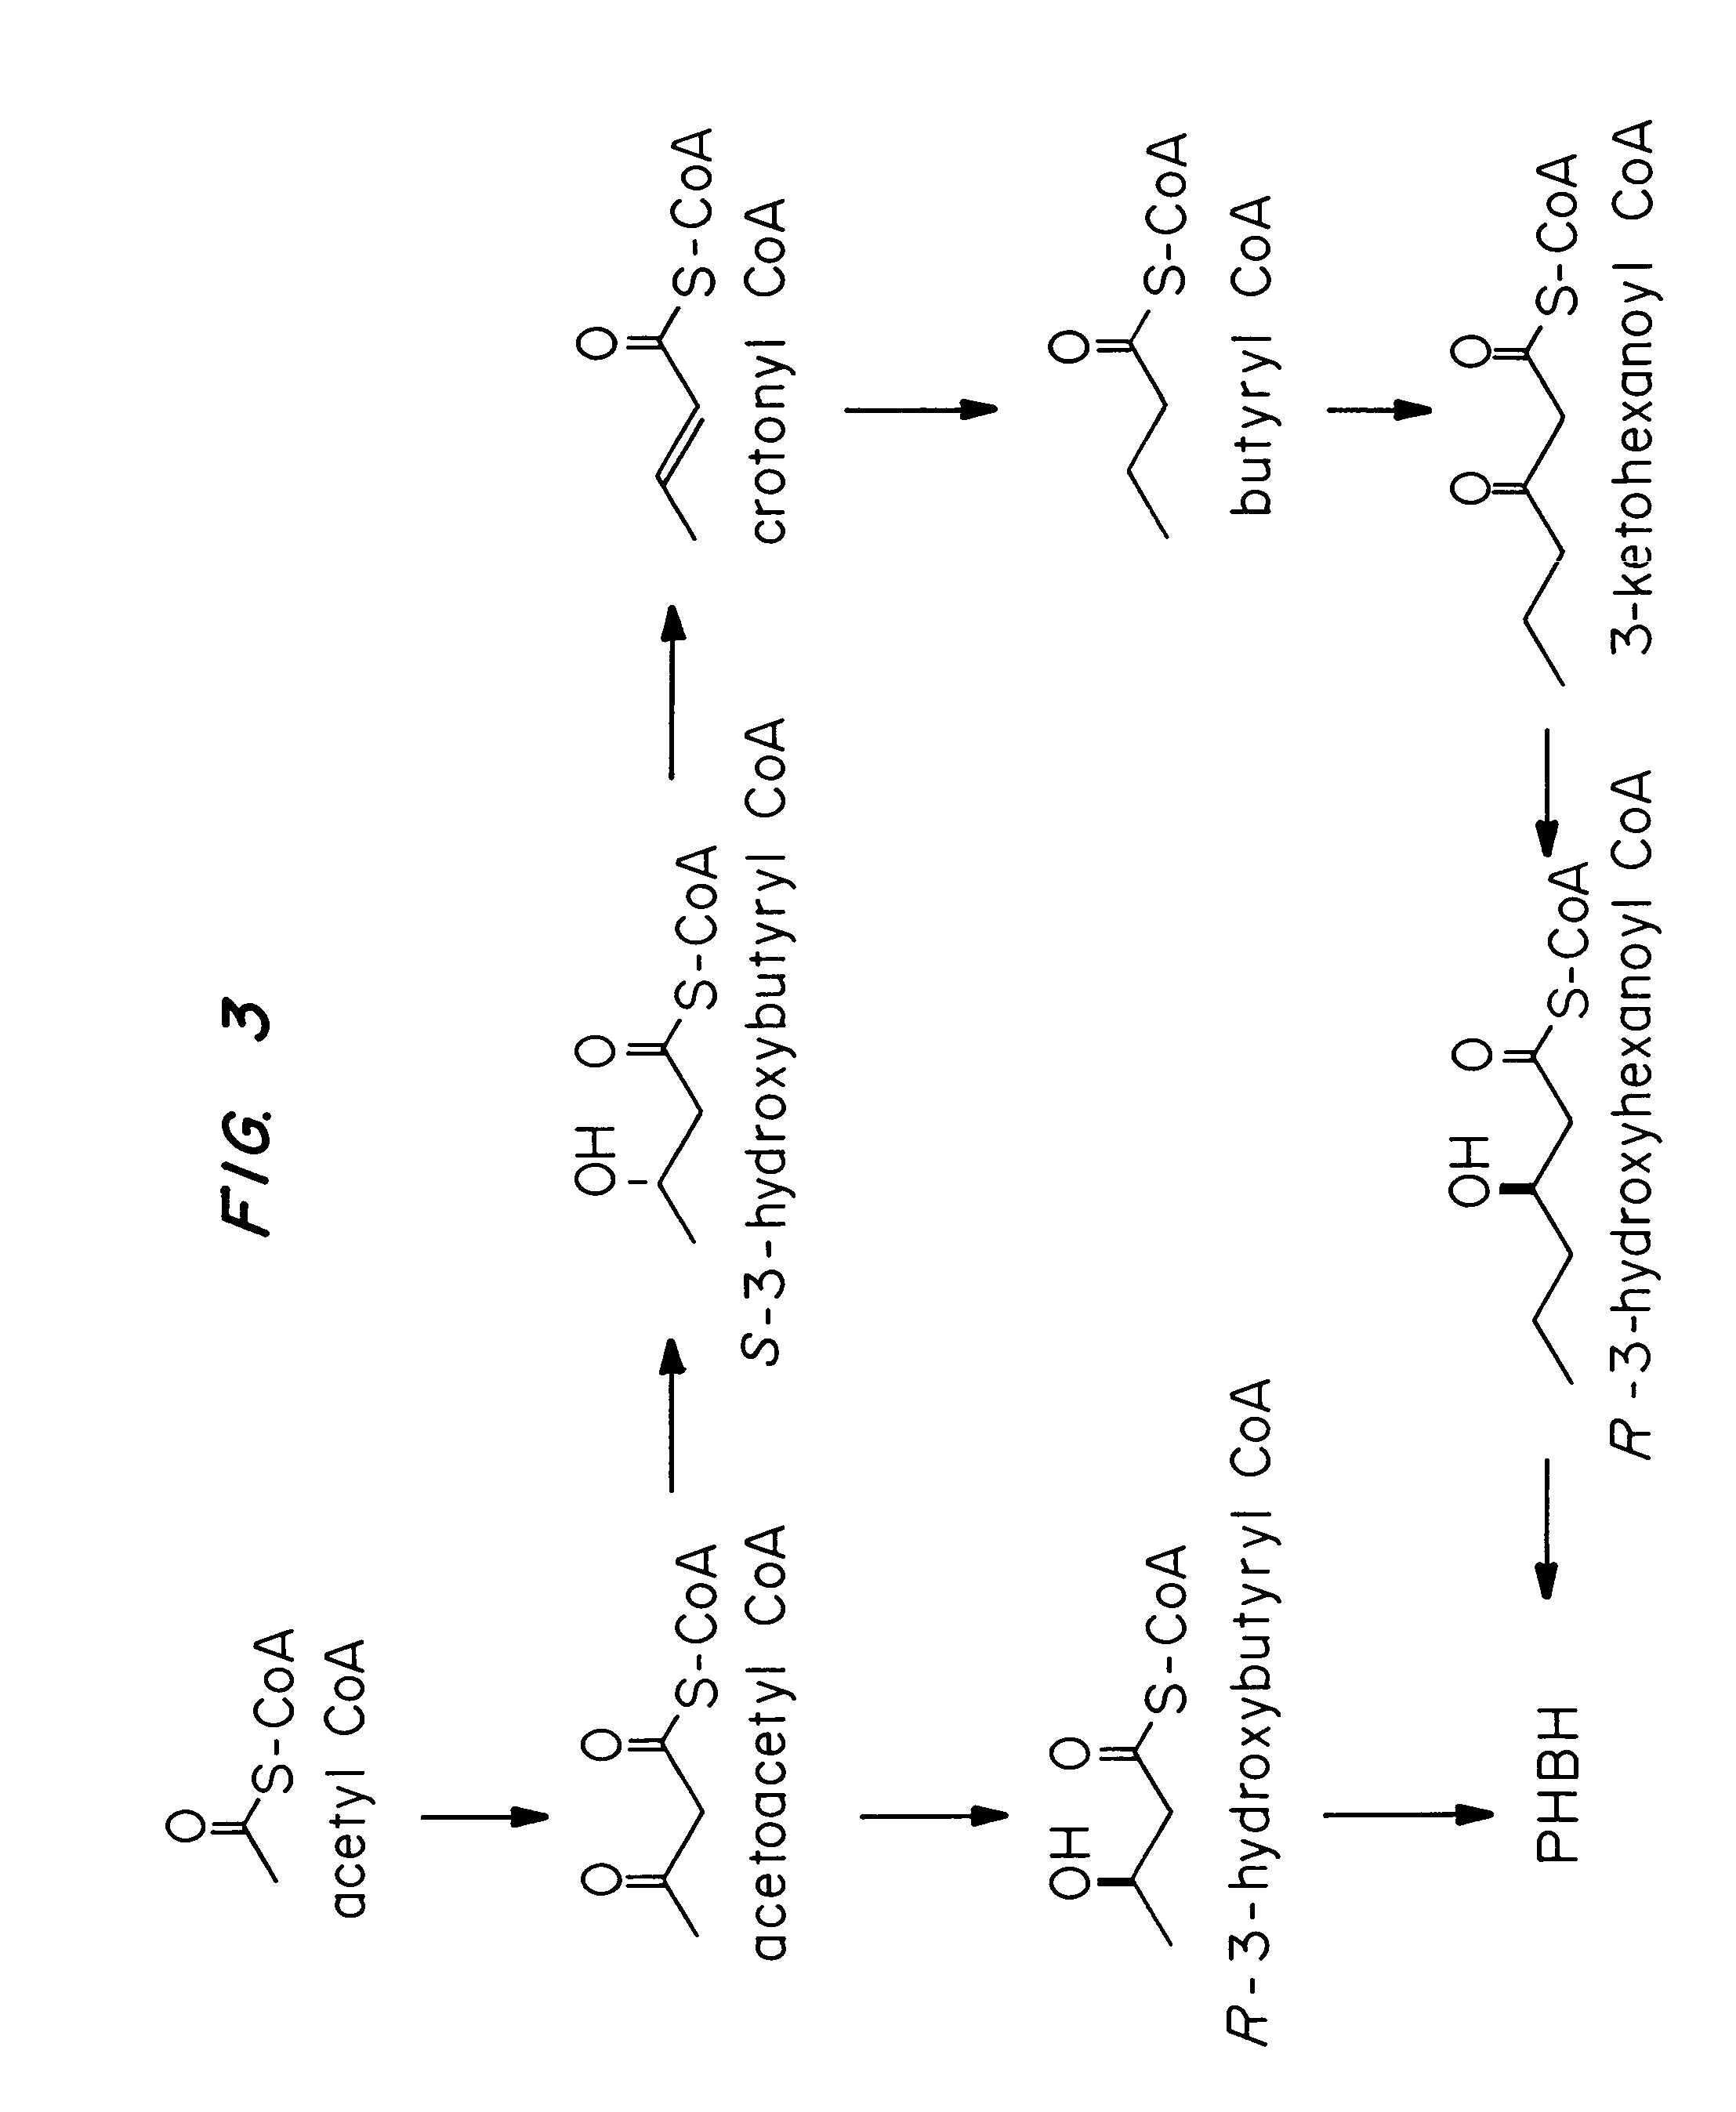 Transgenic systems for the manufacture of poly (3-hydroxy-butyrate-co-3-hydroxyhexanoate)